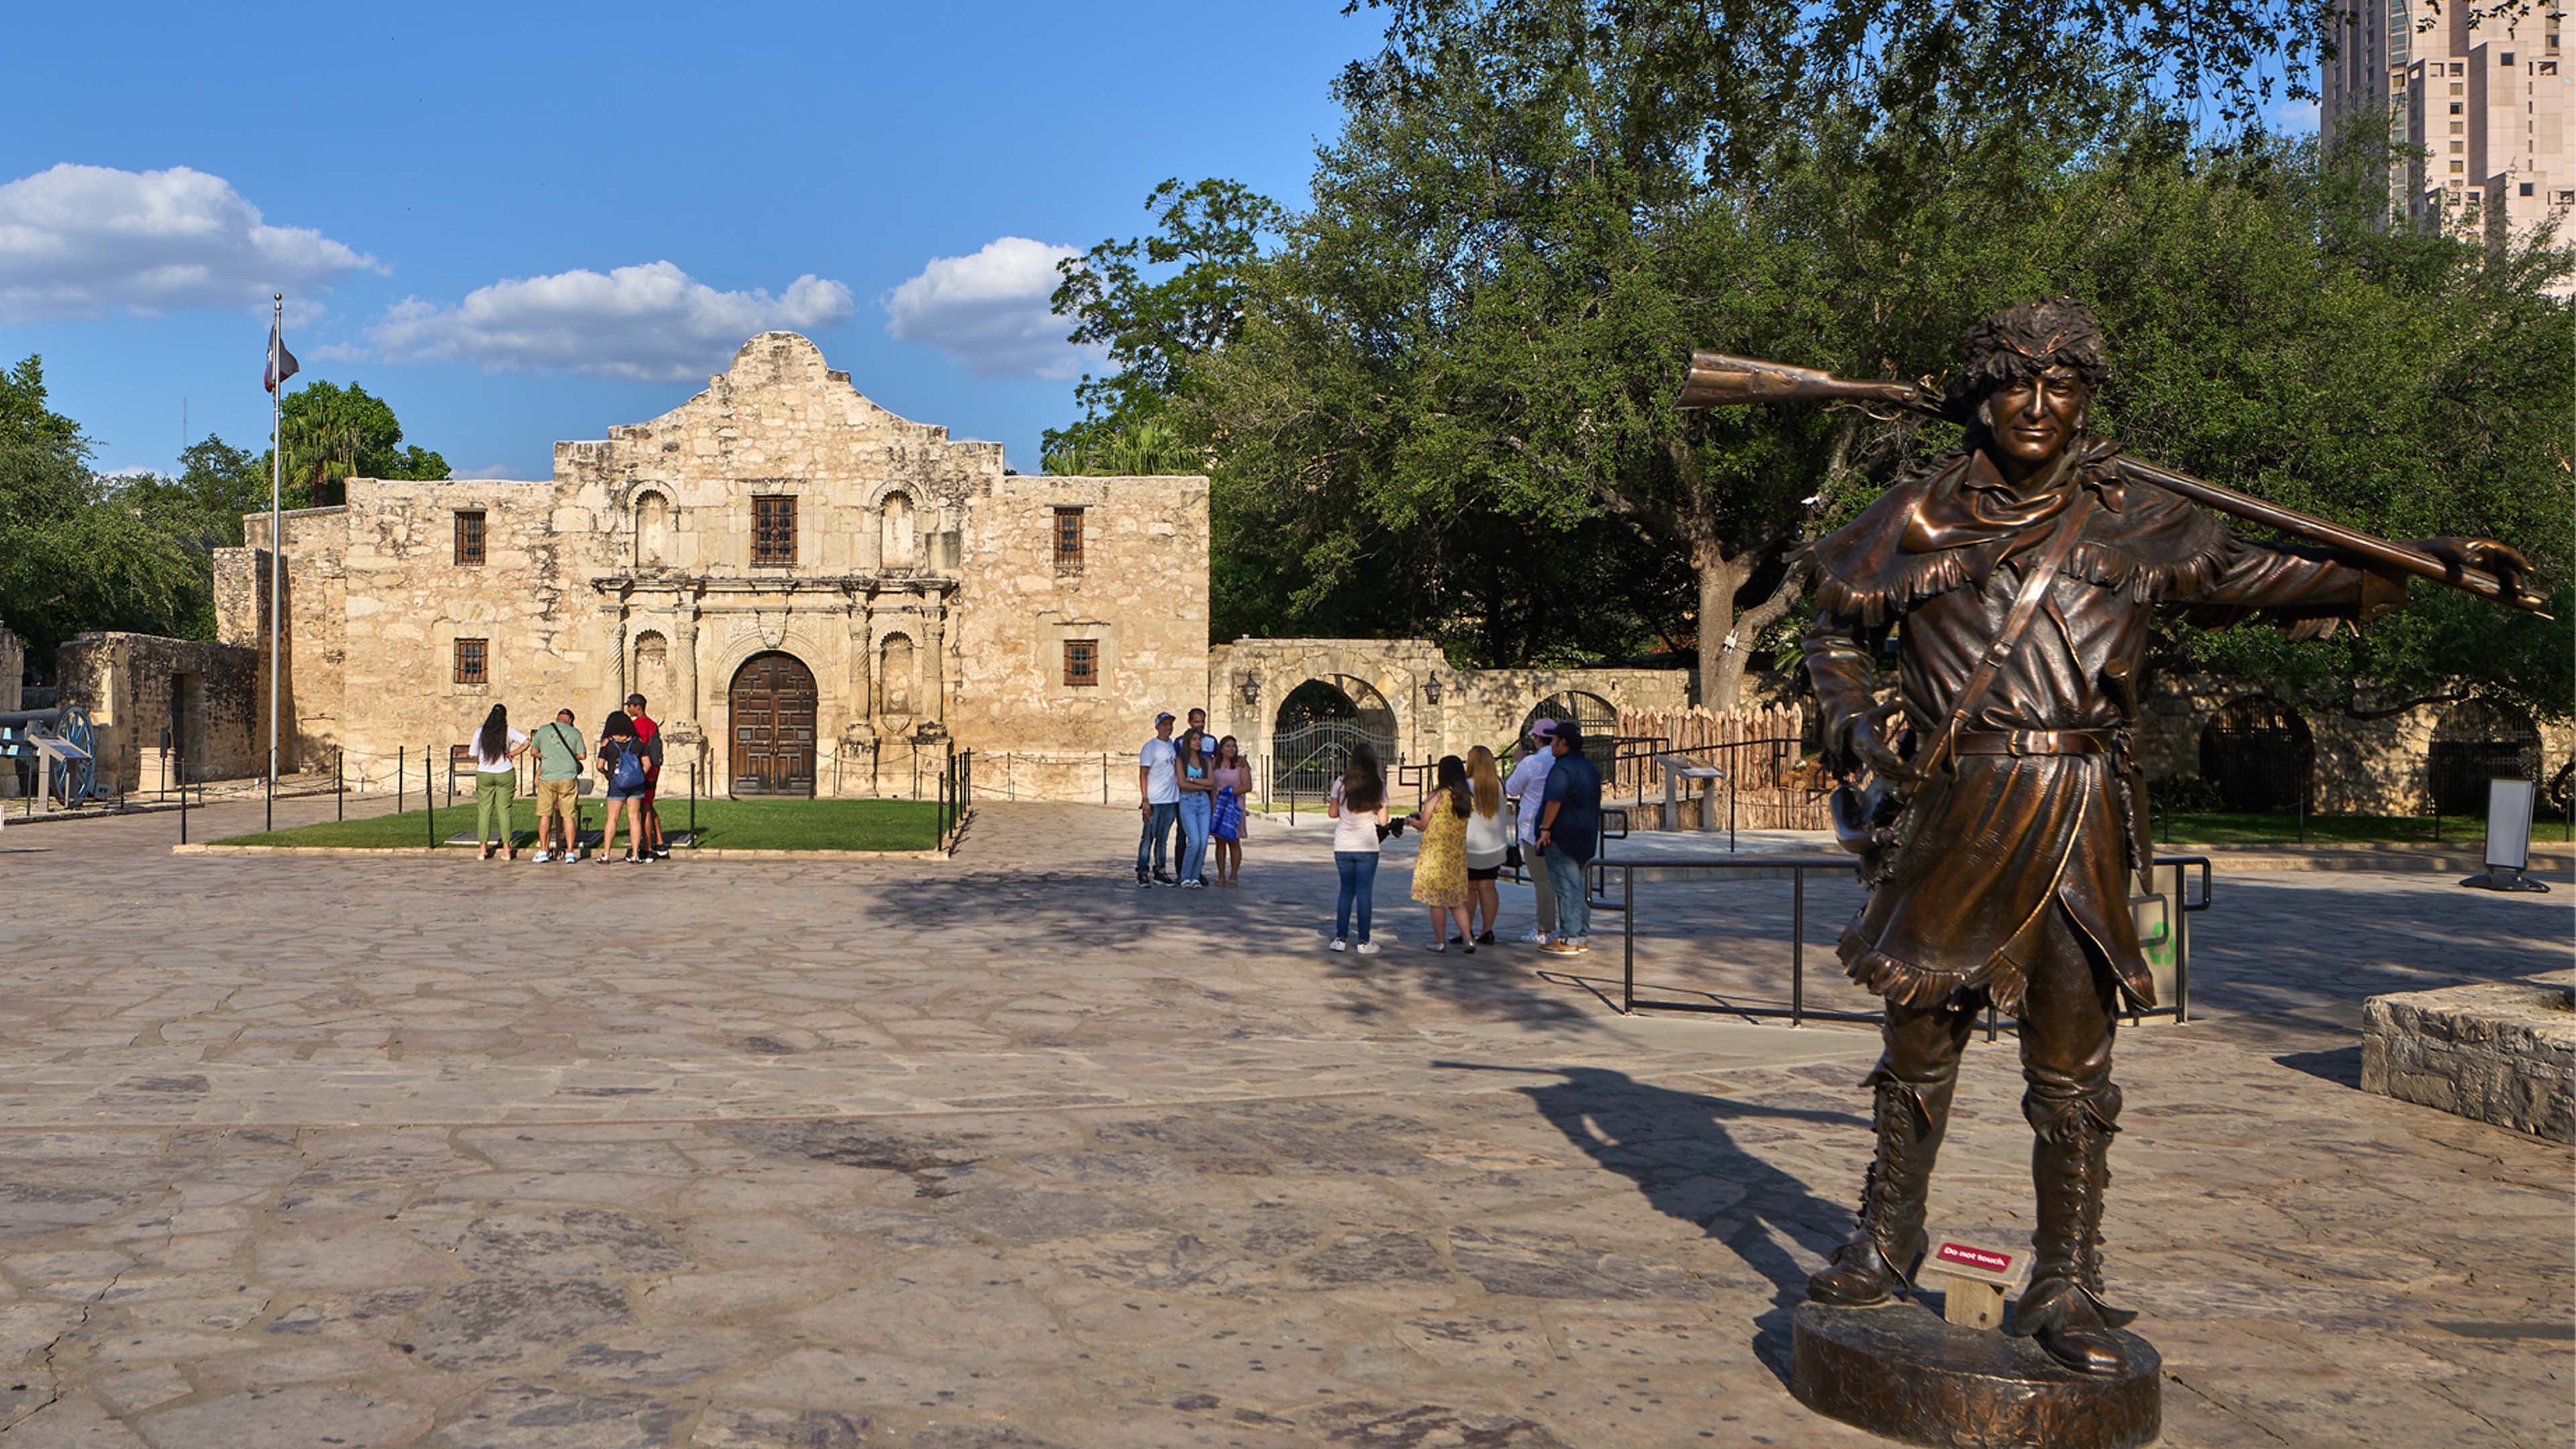 Statue in front of the Alamo